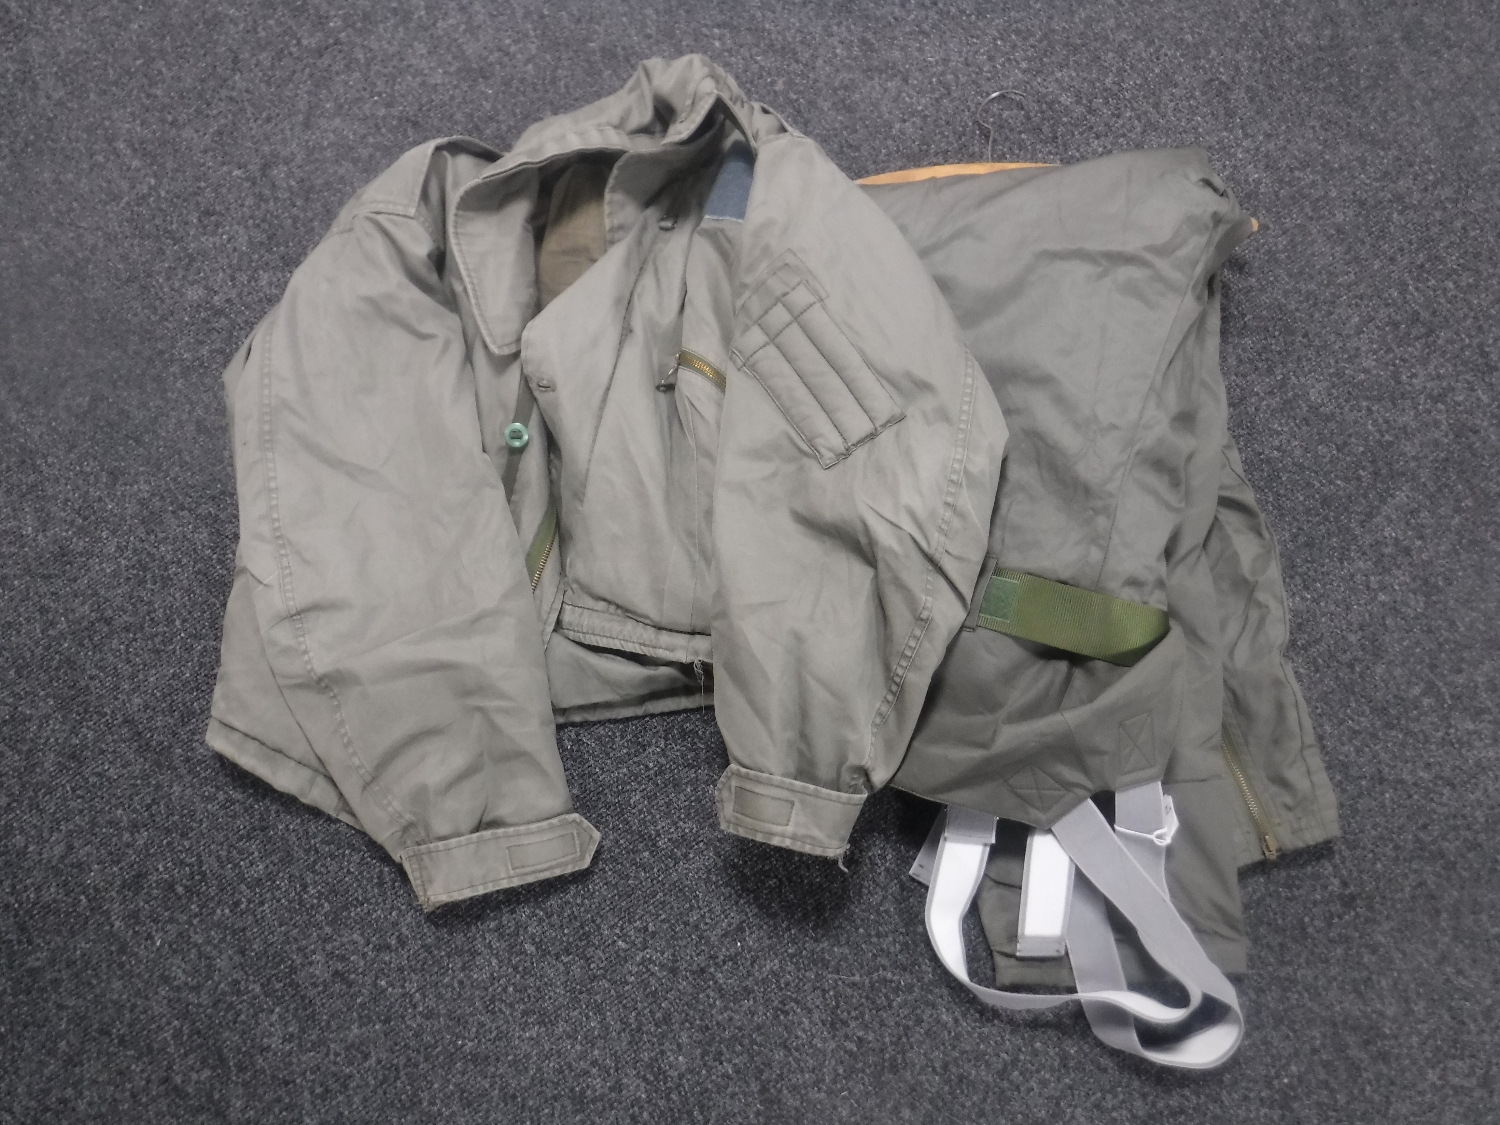 An Air Crew jacket with trousers